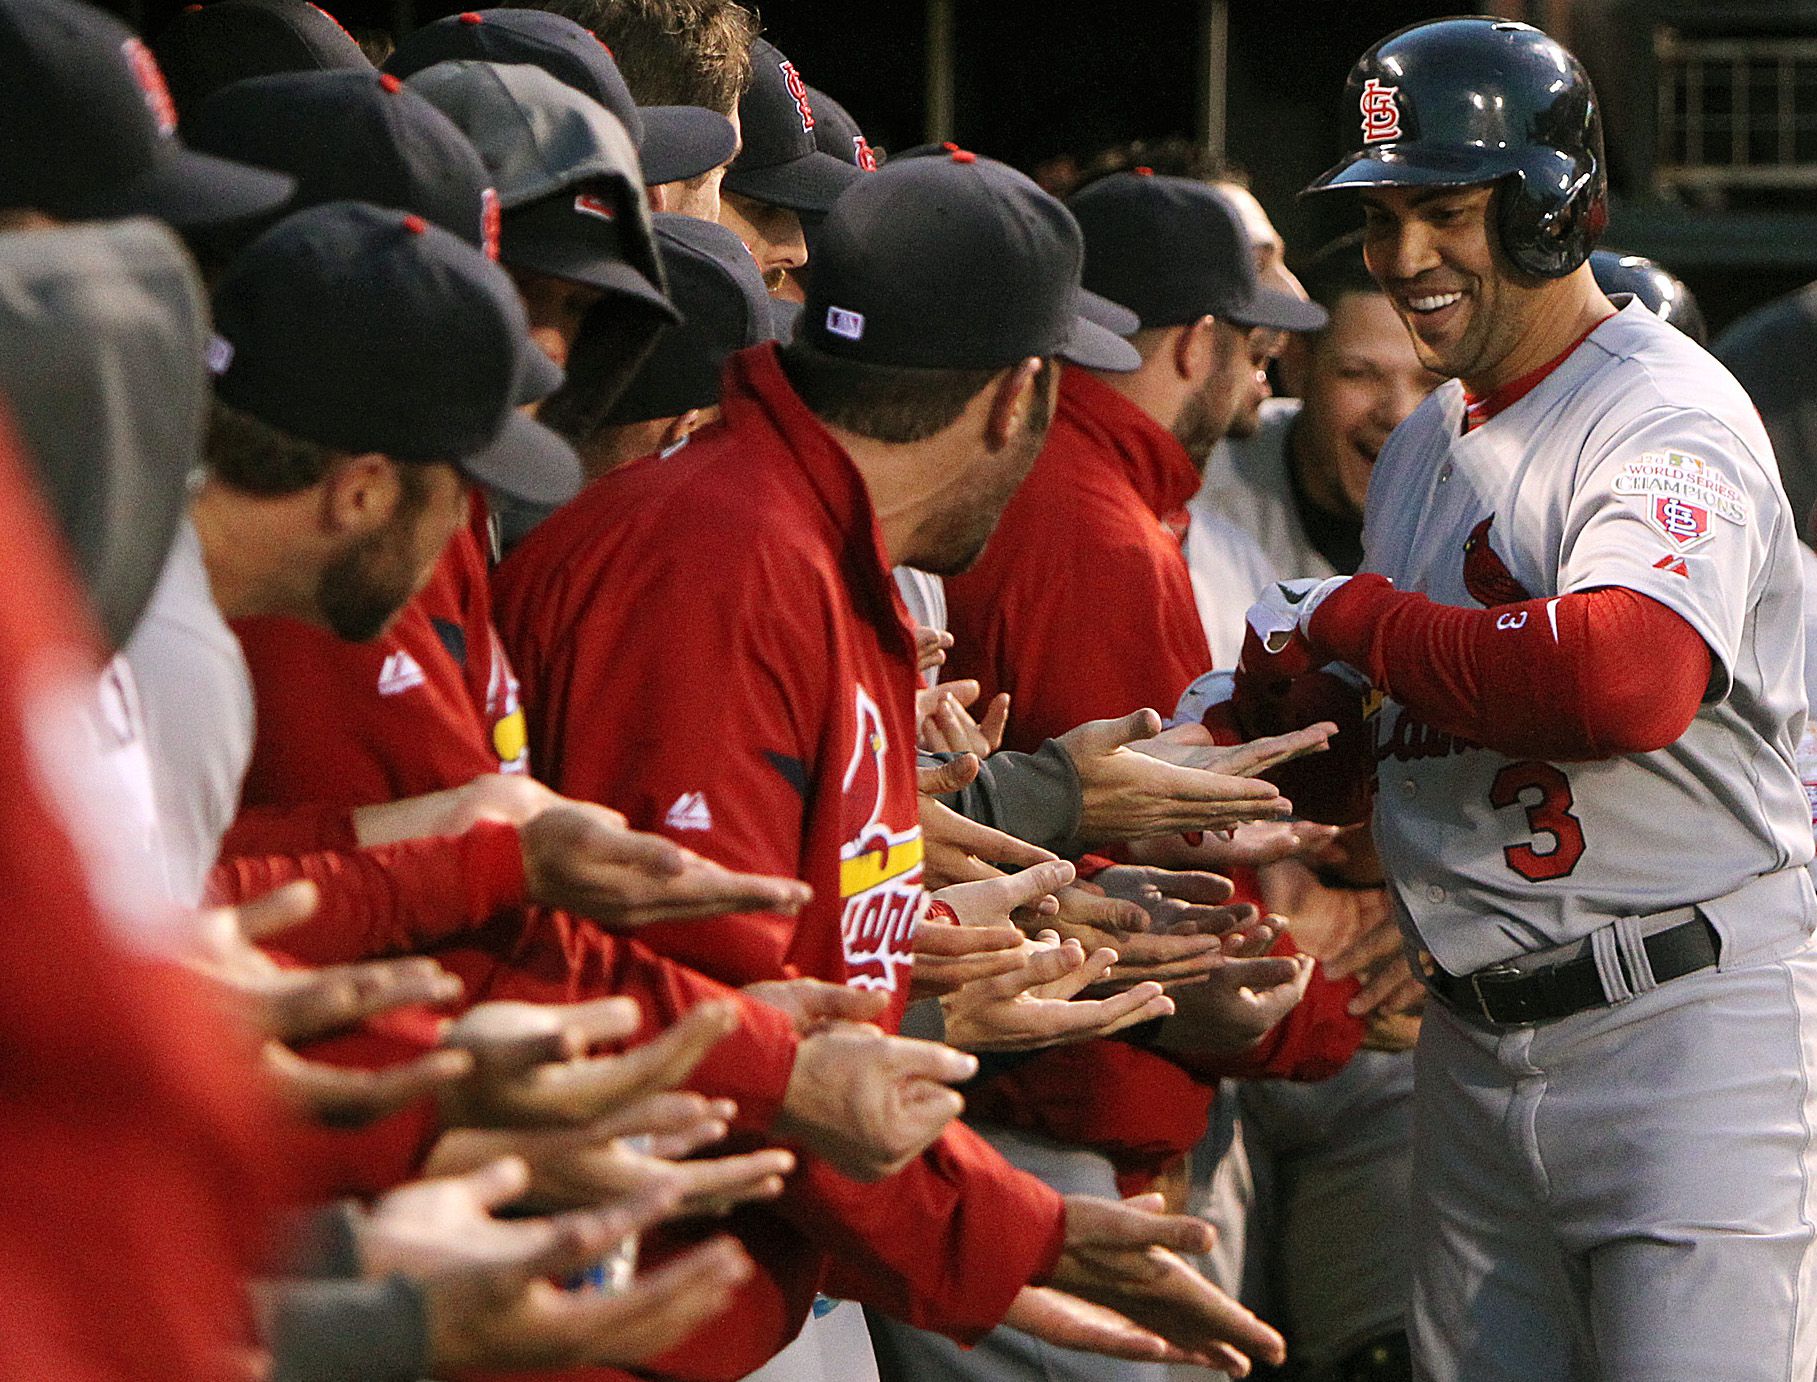 The Year of the St. Louis Cardinals: Celebrating the 2011 World